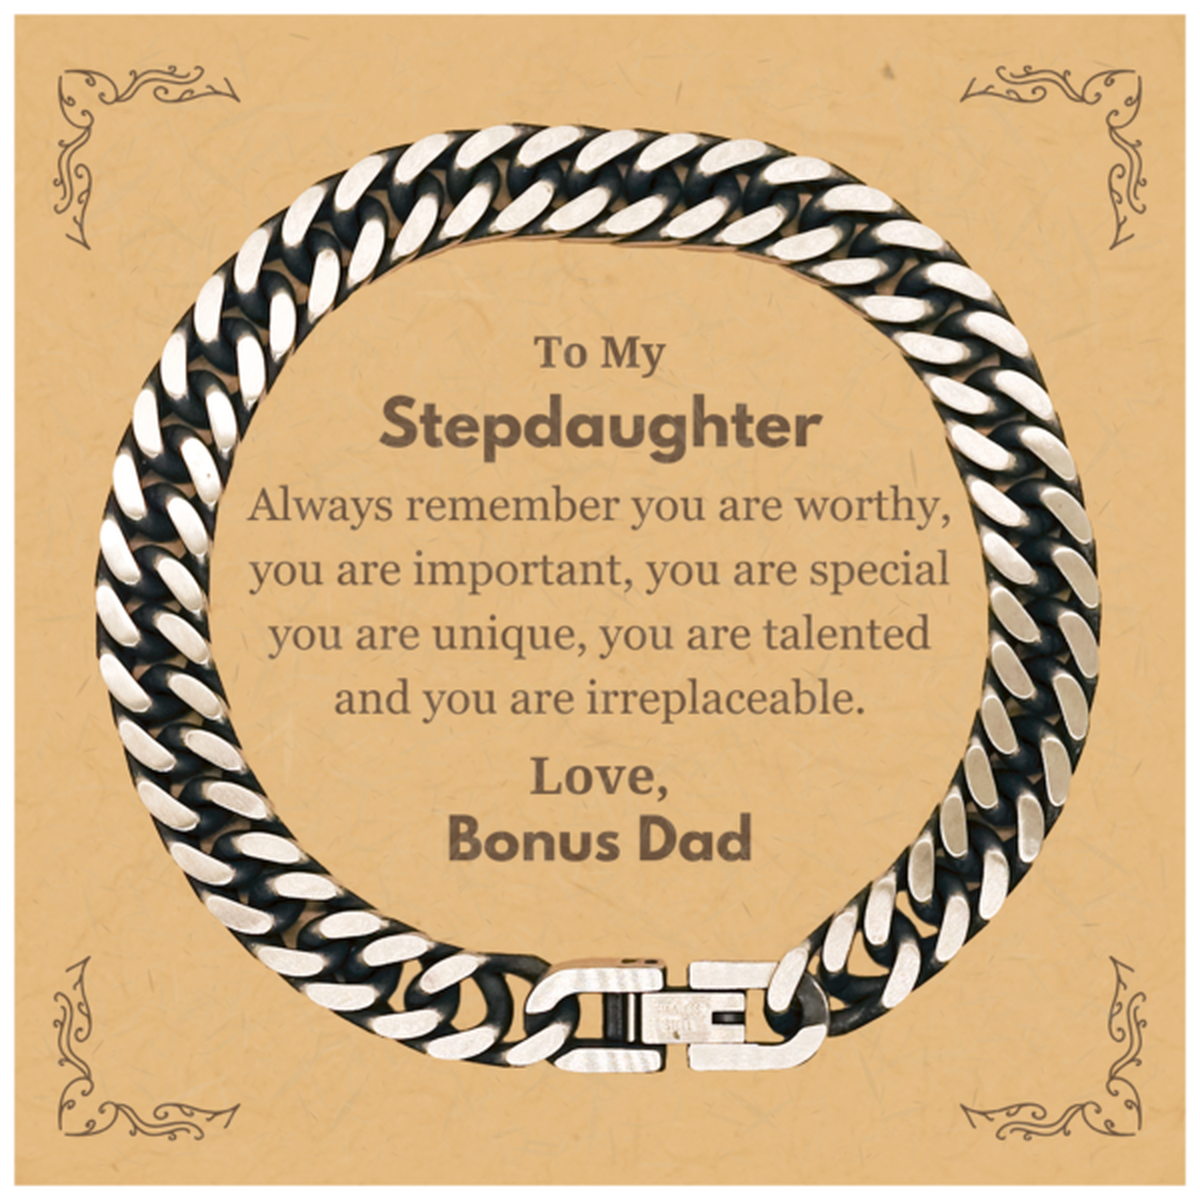 Stepdaughter Birthday Gifts from Bonus Dad, Inspirational Cuban Link Chain Bracelet for Stepdaughter Christmas Graduation Gifts for Stepdaughter Always remember you are worthy, you are important. Love, Bonus Dad